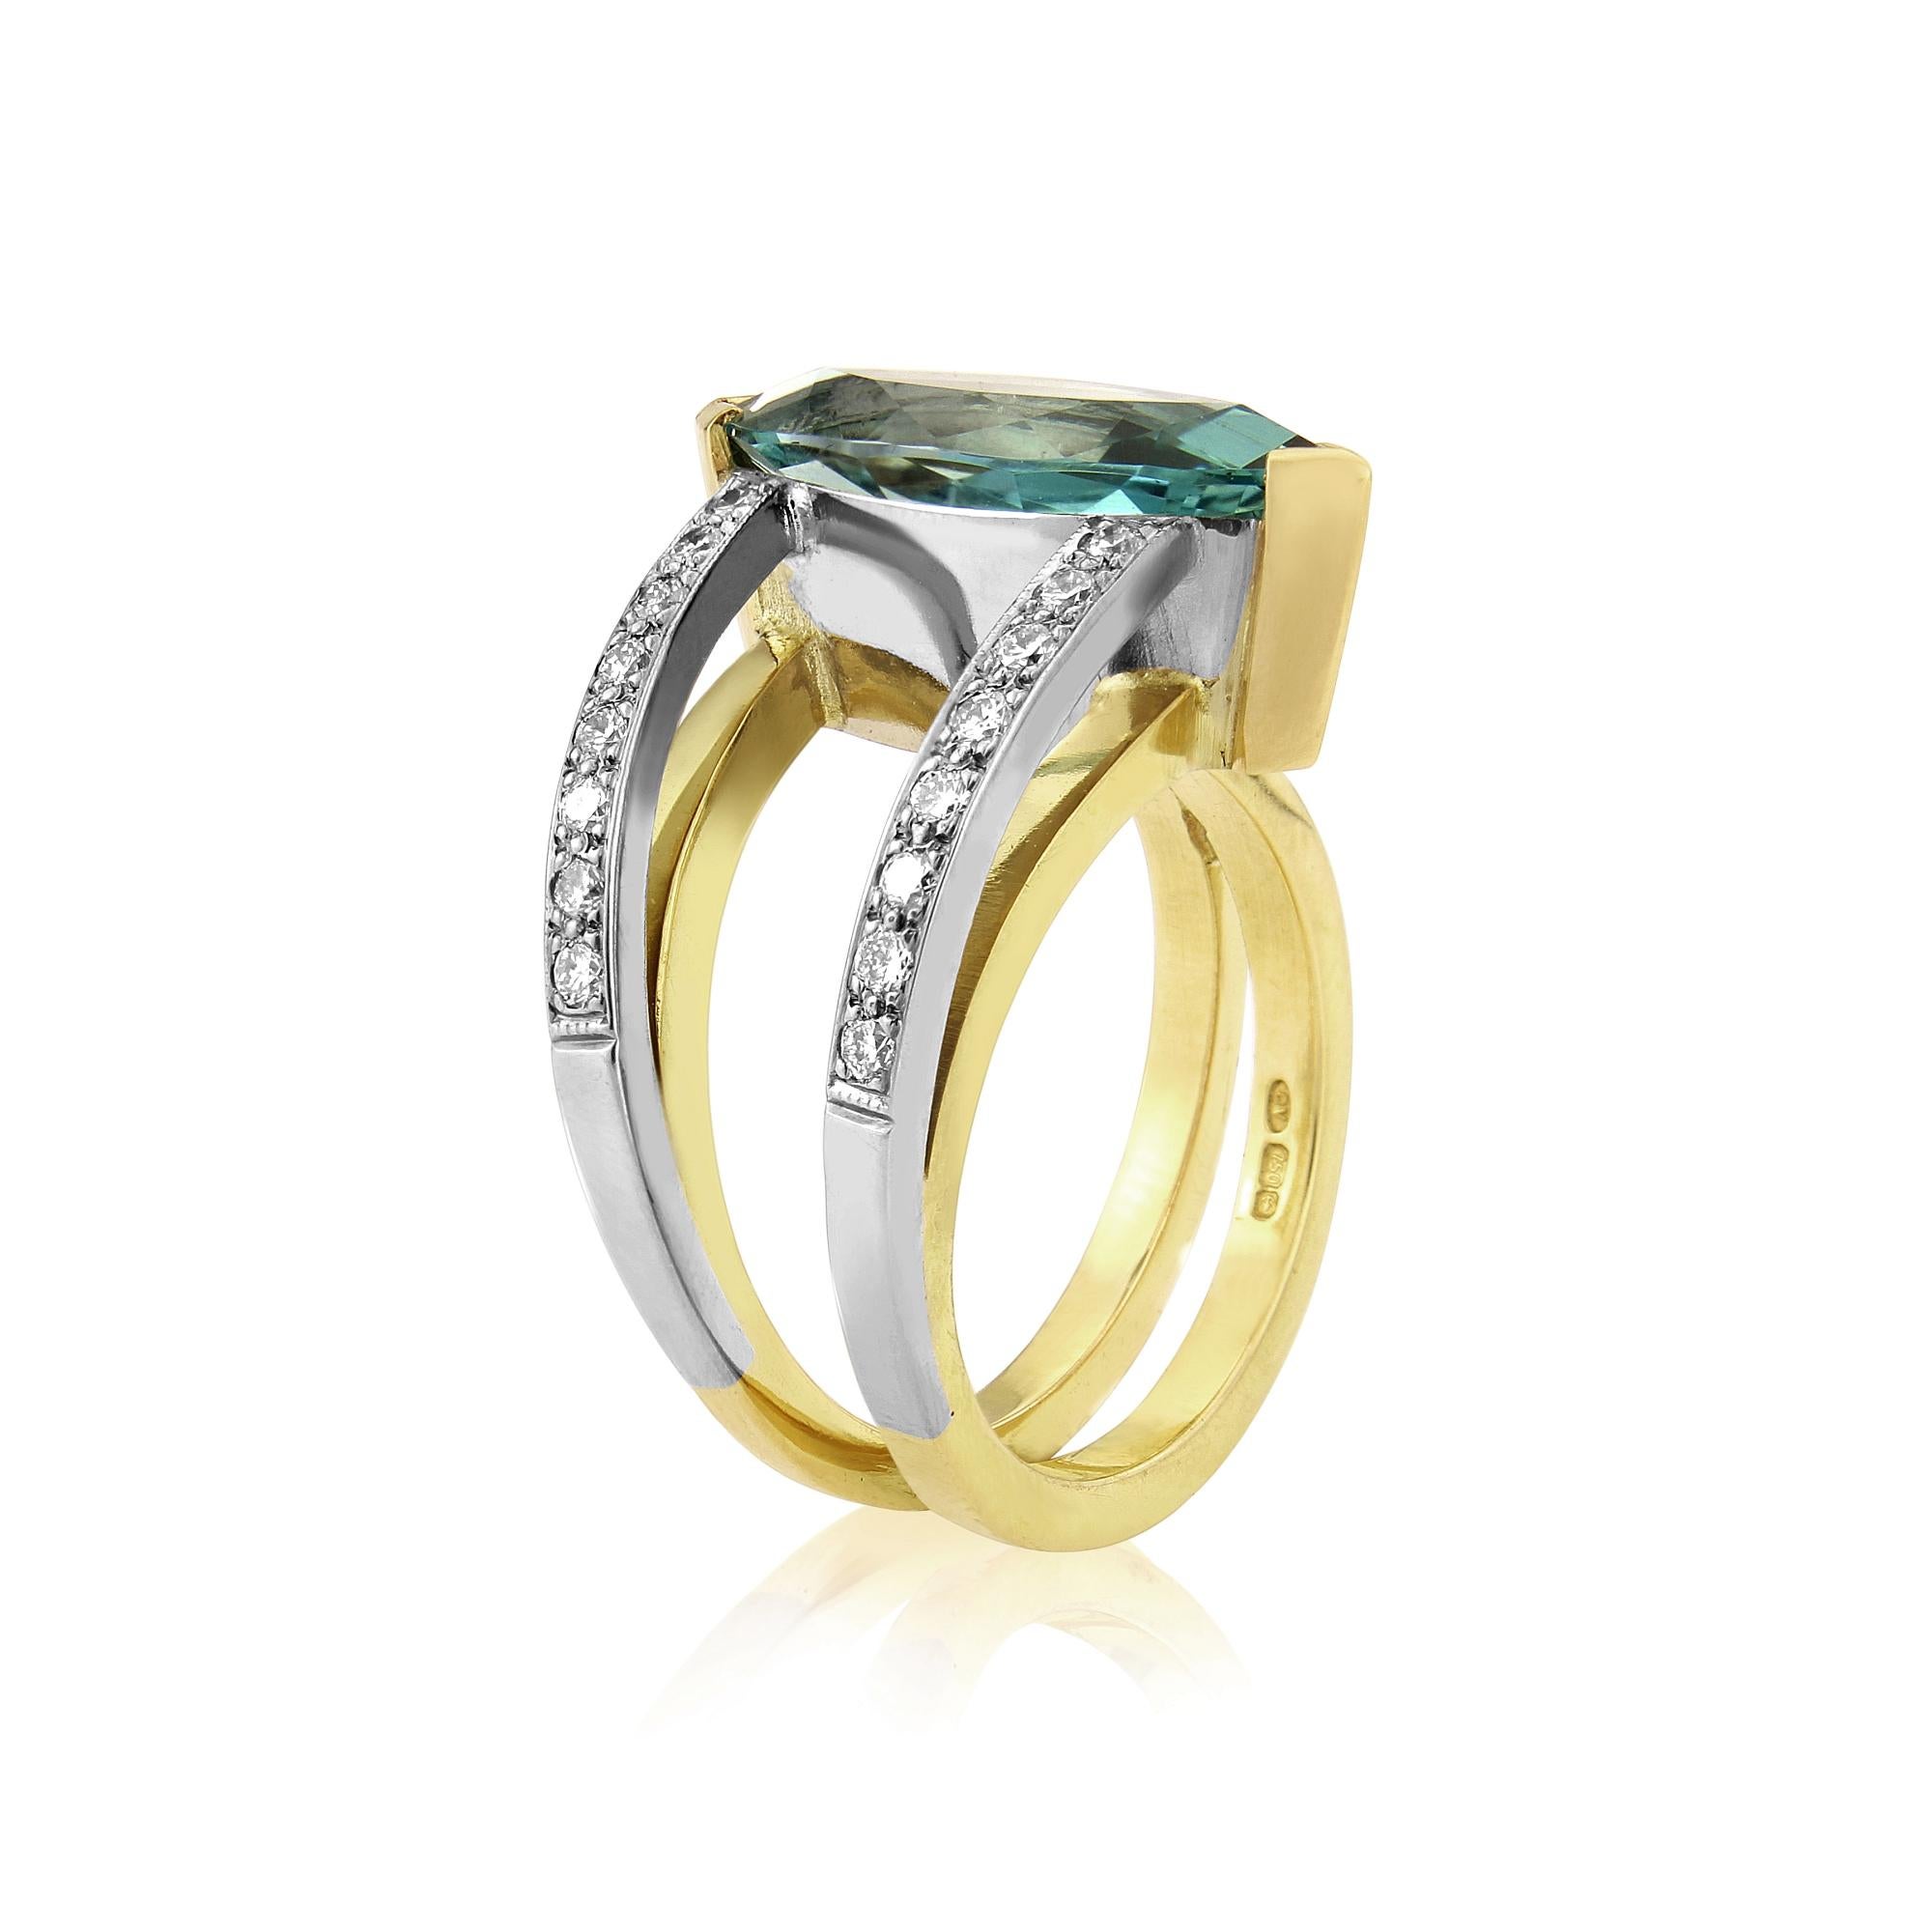 Aquamarine and Diamond dress ring in 18ct yellow and white gold. This ring is stunning, the aquamarine has been diamond cut and the colour is amazing just what it should be
Aquamarine is 3.00ct
Diamond fvvs approx weight 0.35ct
ring size N 1/2
THIS